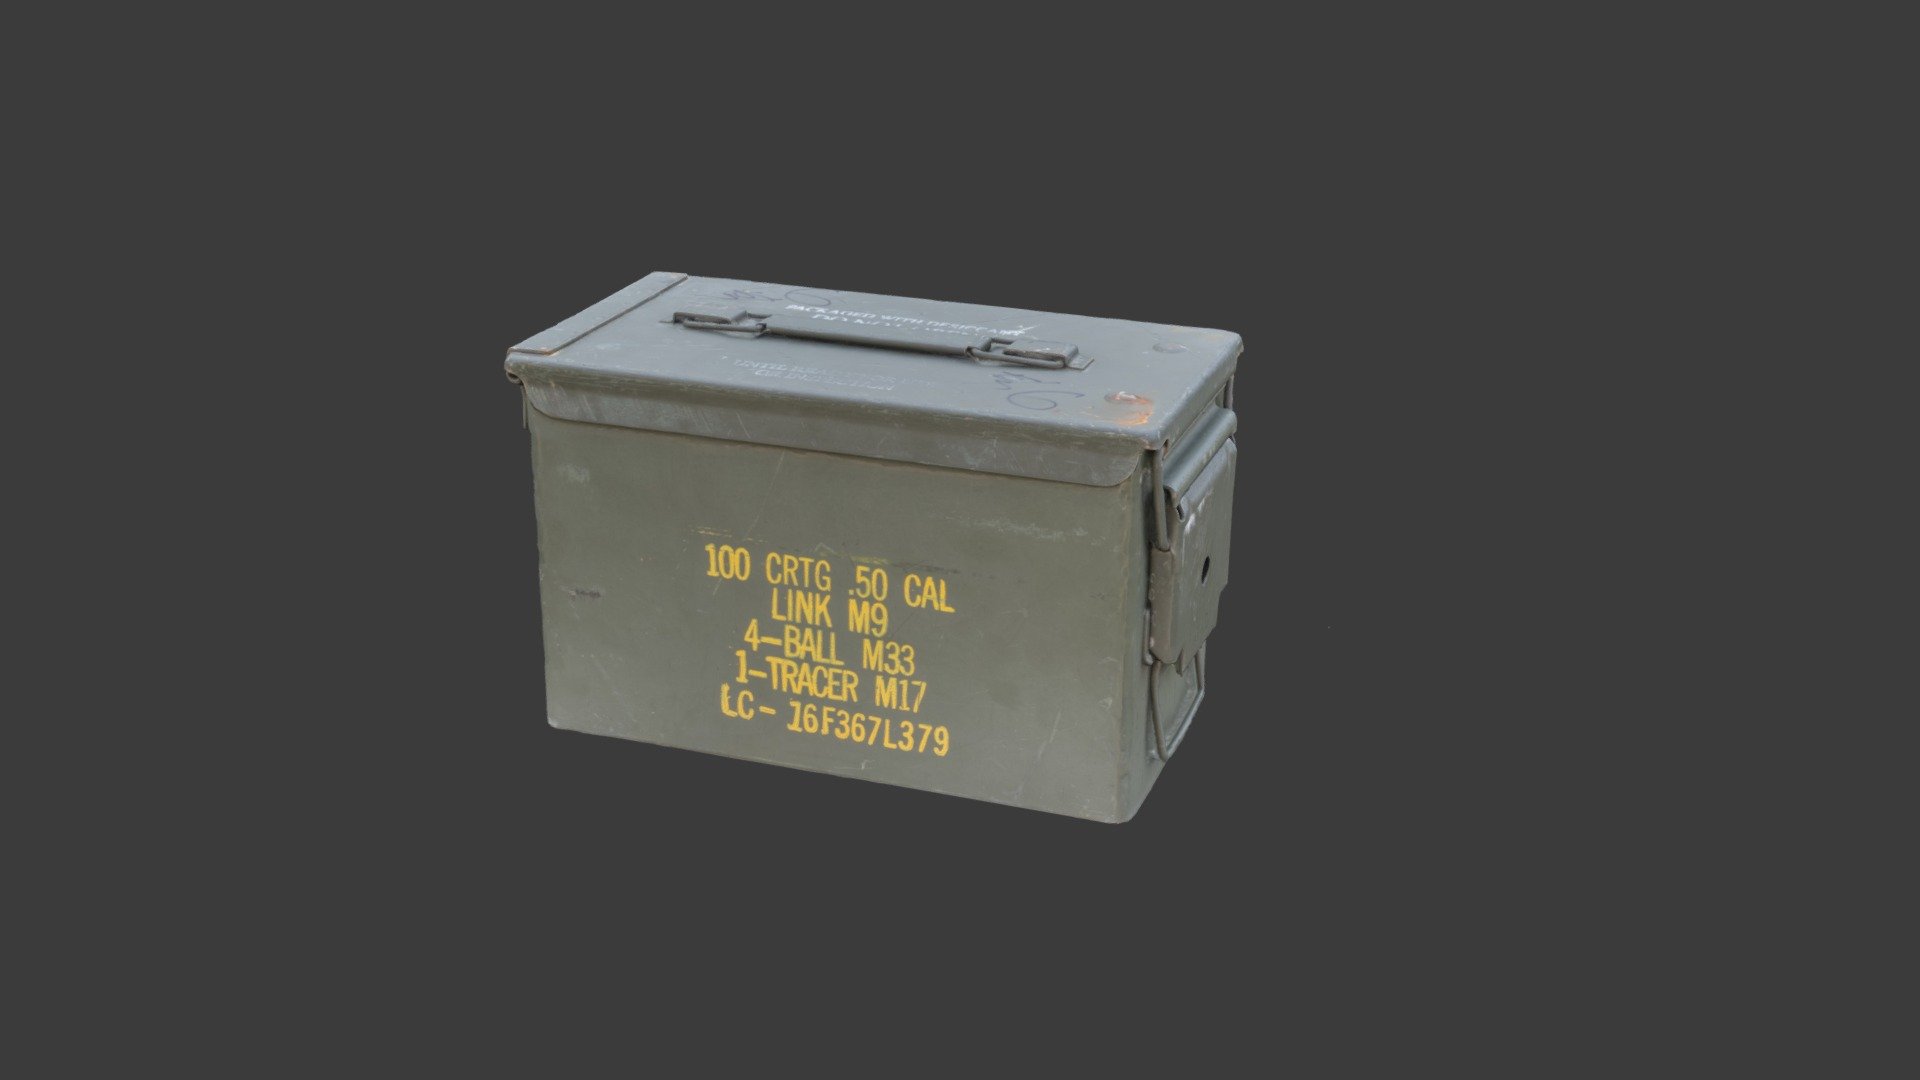 Original used .50 cal ammo box

Scanned with Canon 6D (20,2 MPix) w/ 50mm - 110 images - Reality Capture

The quality is downgraded because of Sketchfab upload requirements 3d model